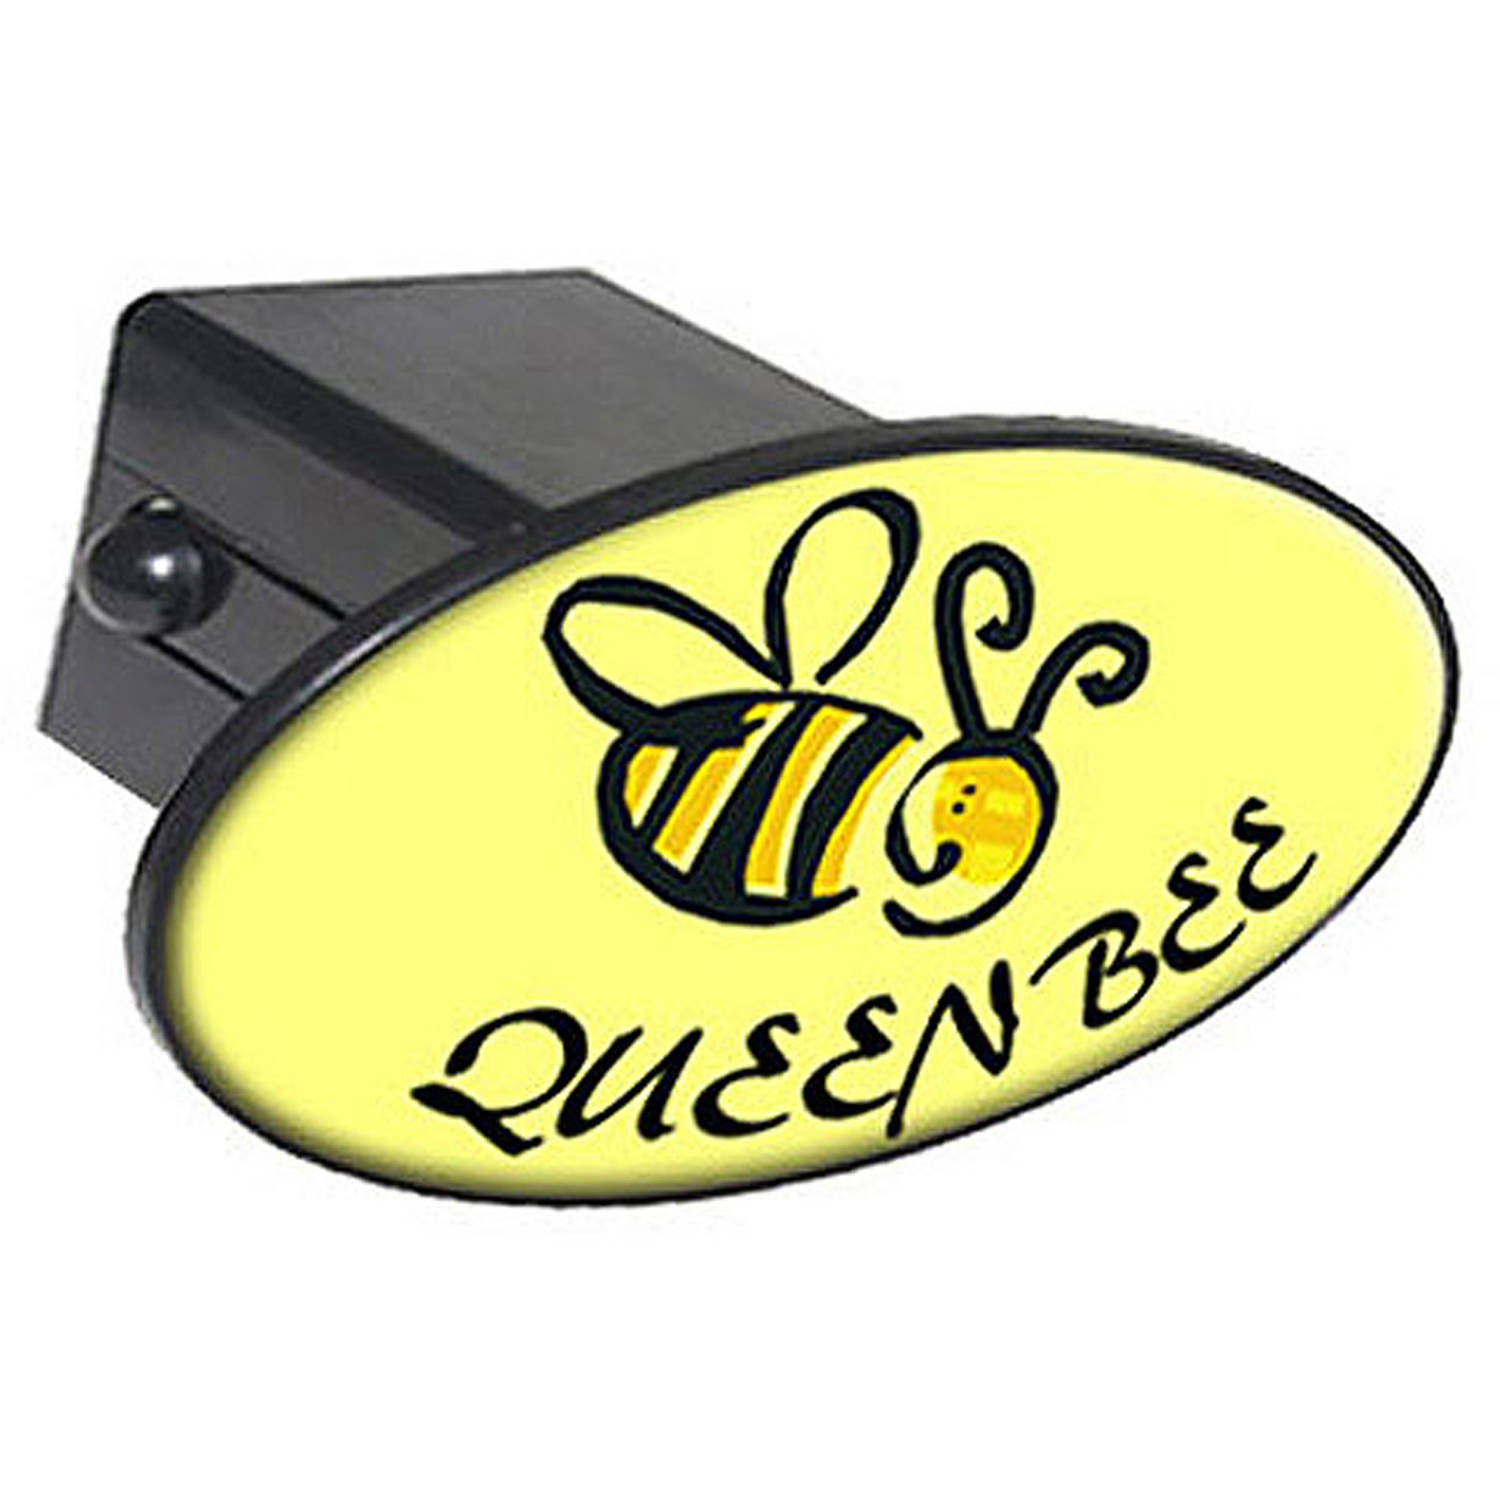 Queen Bee, Funny 2" Oval Tow Trailer Hitch Cover Plug Insert ...